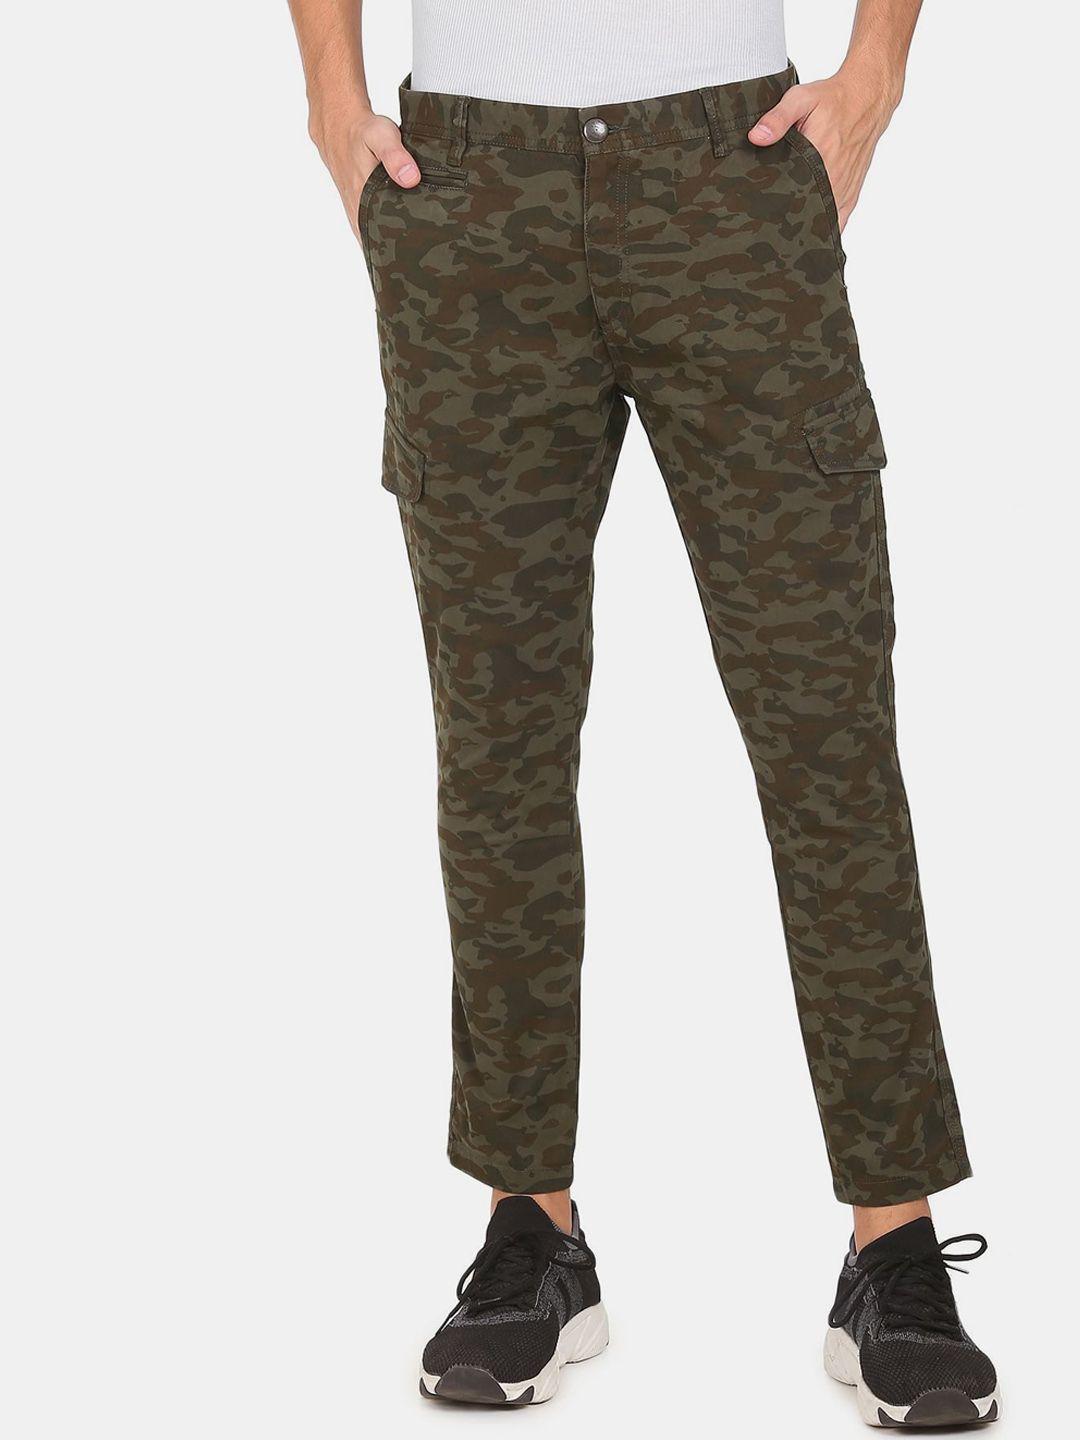 u.s. polo assn. denim co. men olive green & brown camouflage printed cargos trousers